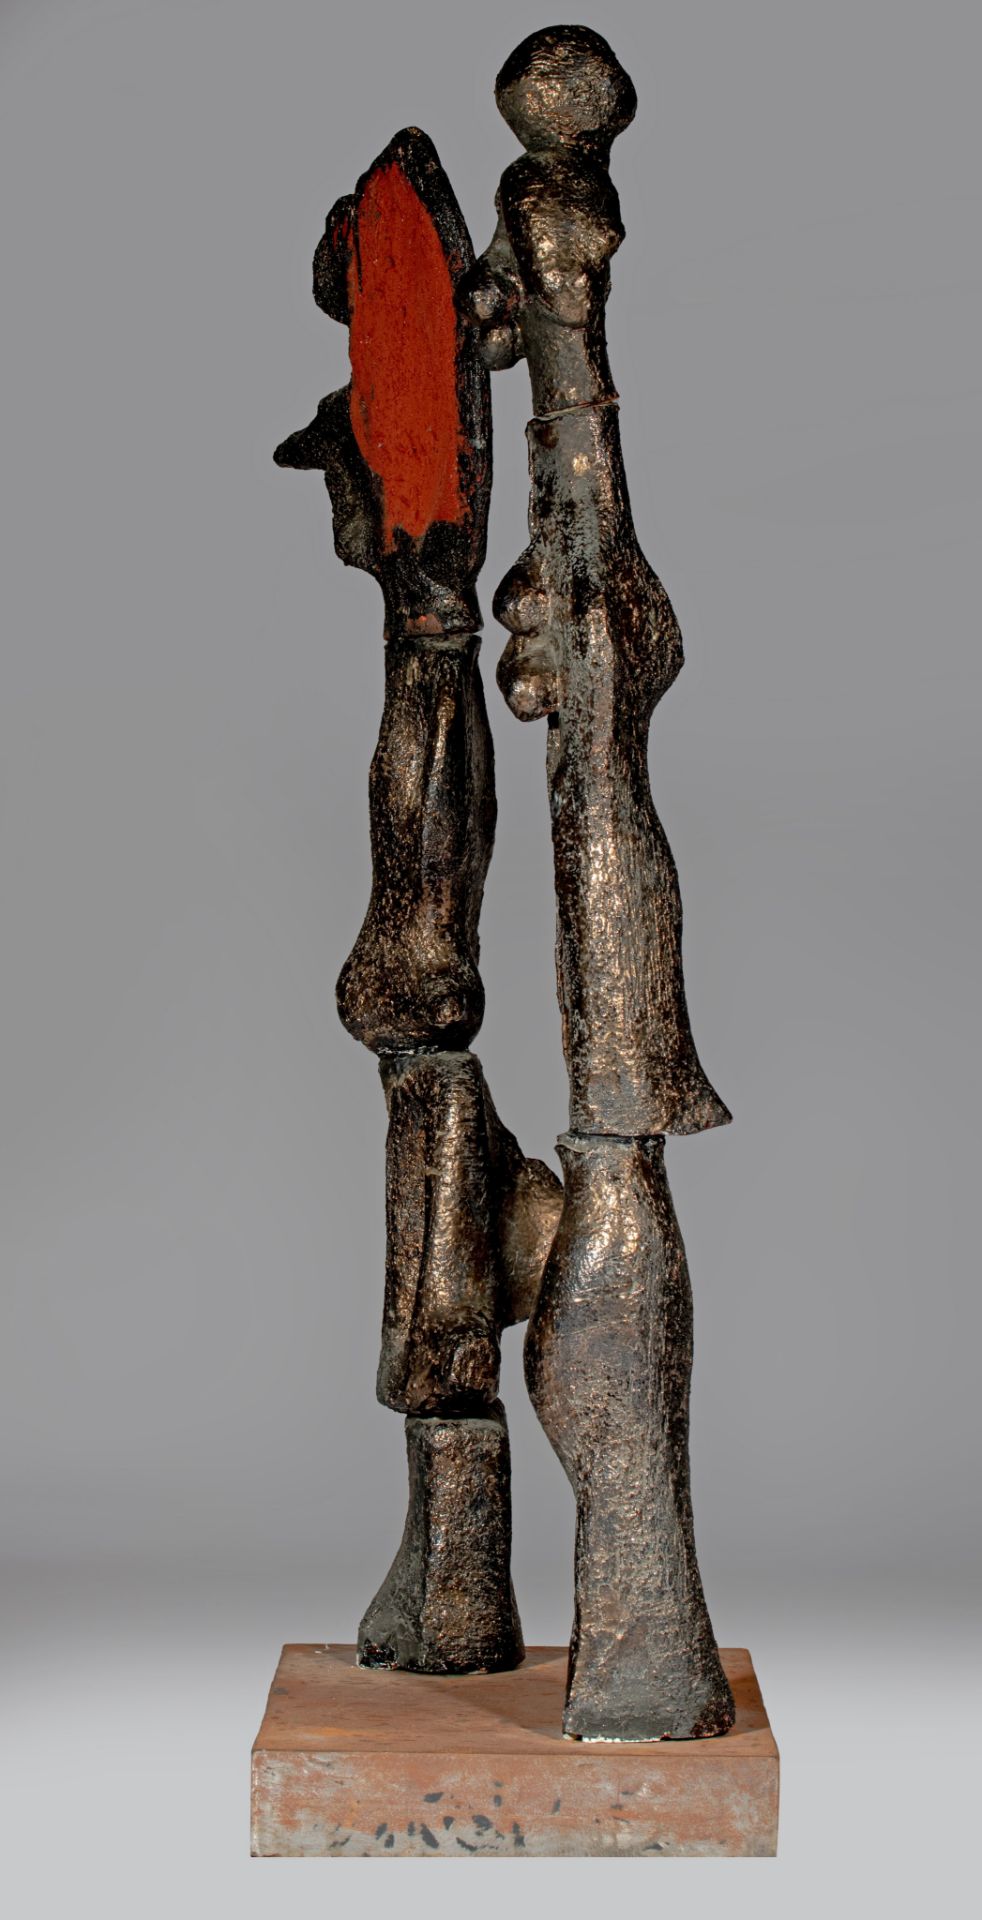 Yves Rhaye (1936-1995), 'Personnages Fantastiques', produced by Perignem, 1970, patinated terracotta - Image 5 of 8